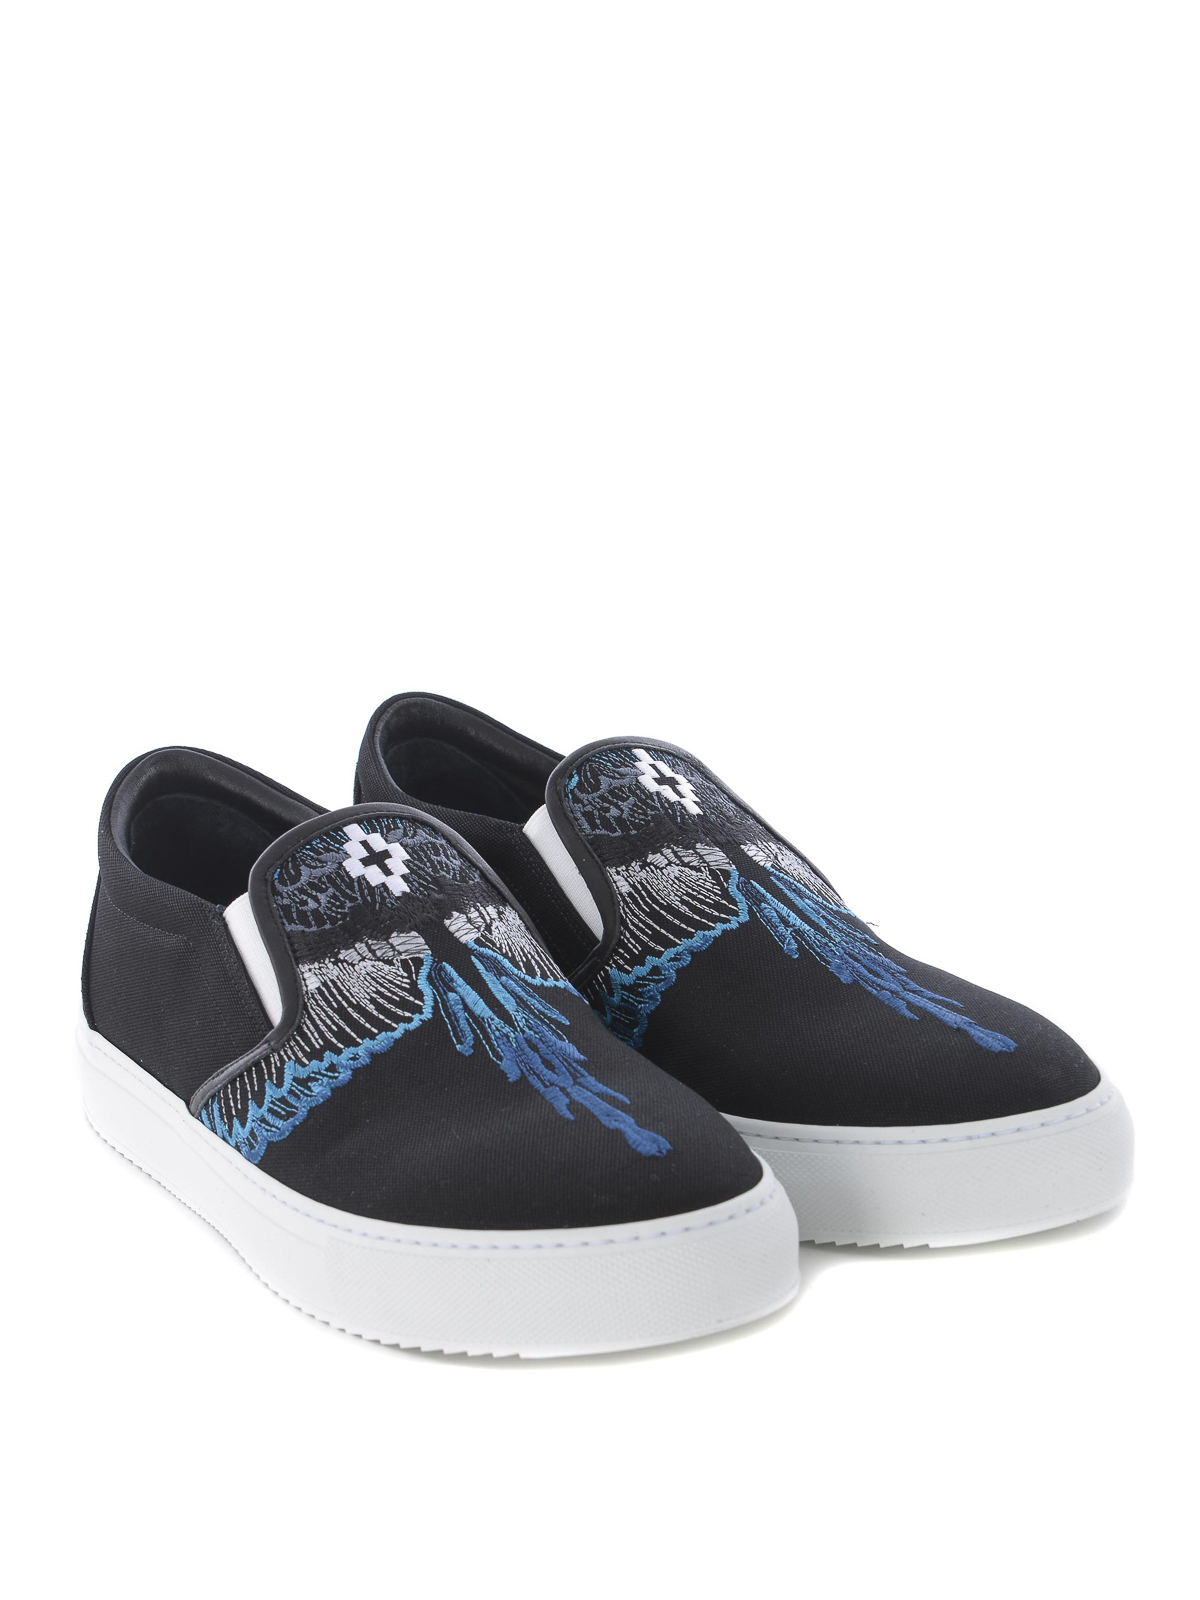 Marcelo Burlon - Blue wings embroidered slip on sneakers - trainers -  CMIA015S198571411088